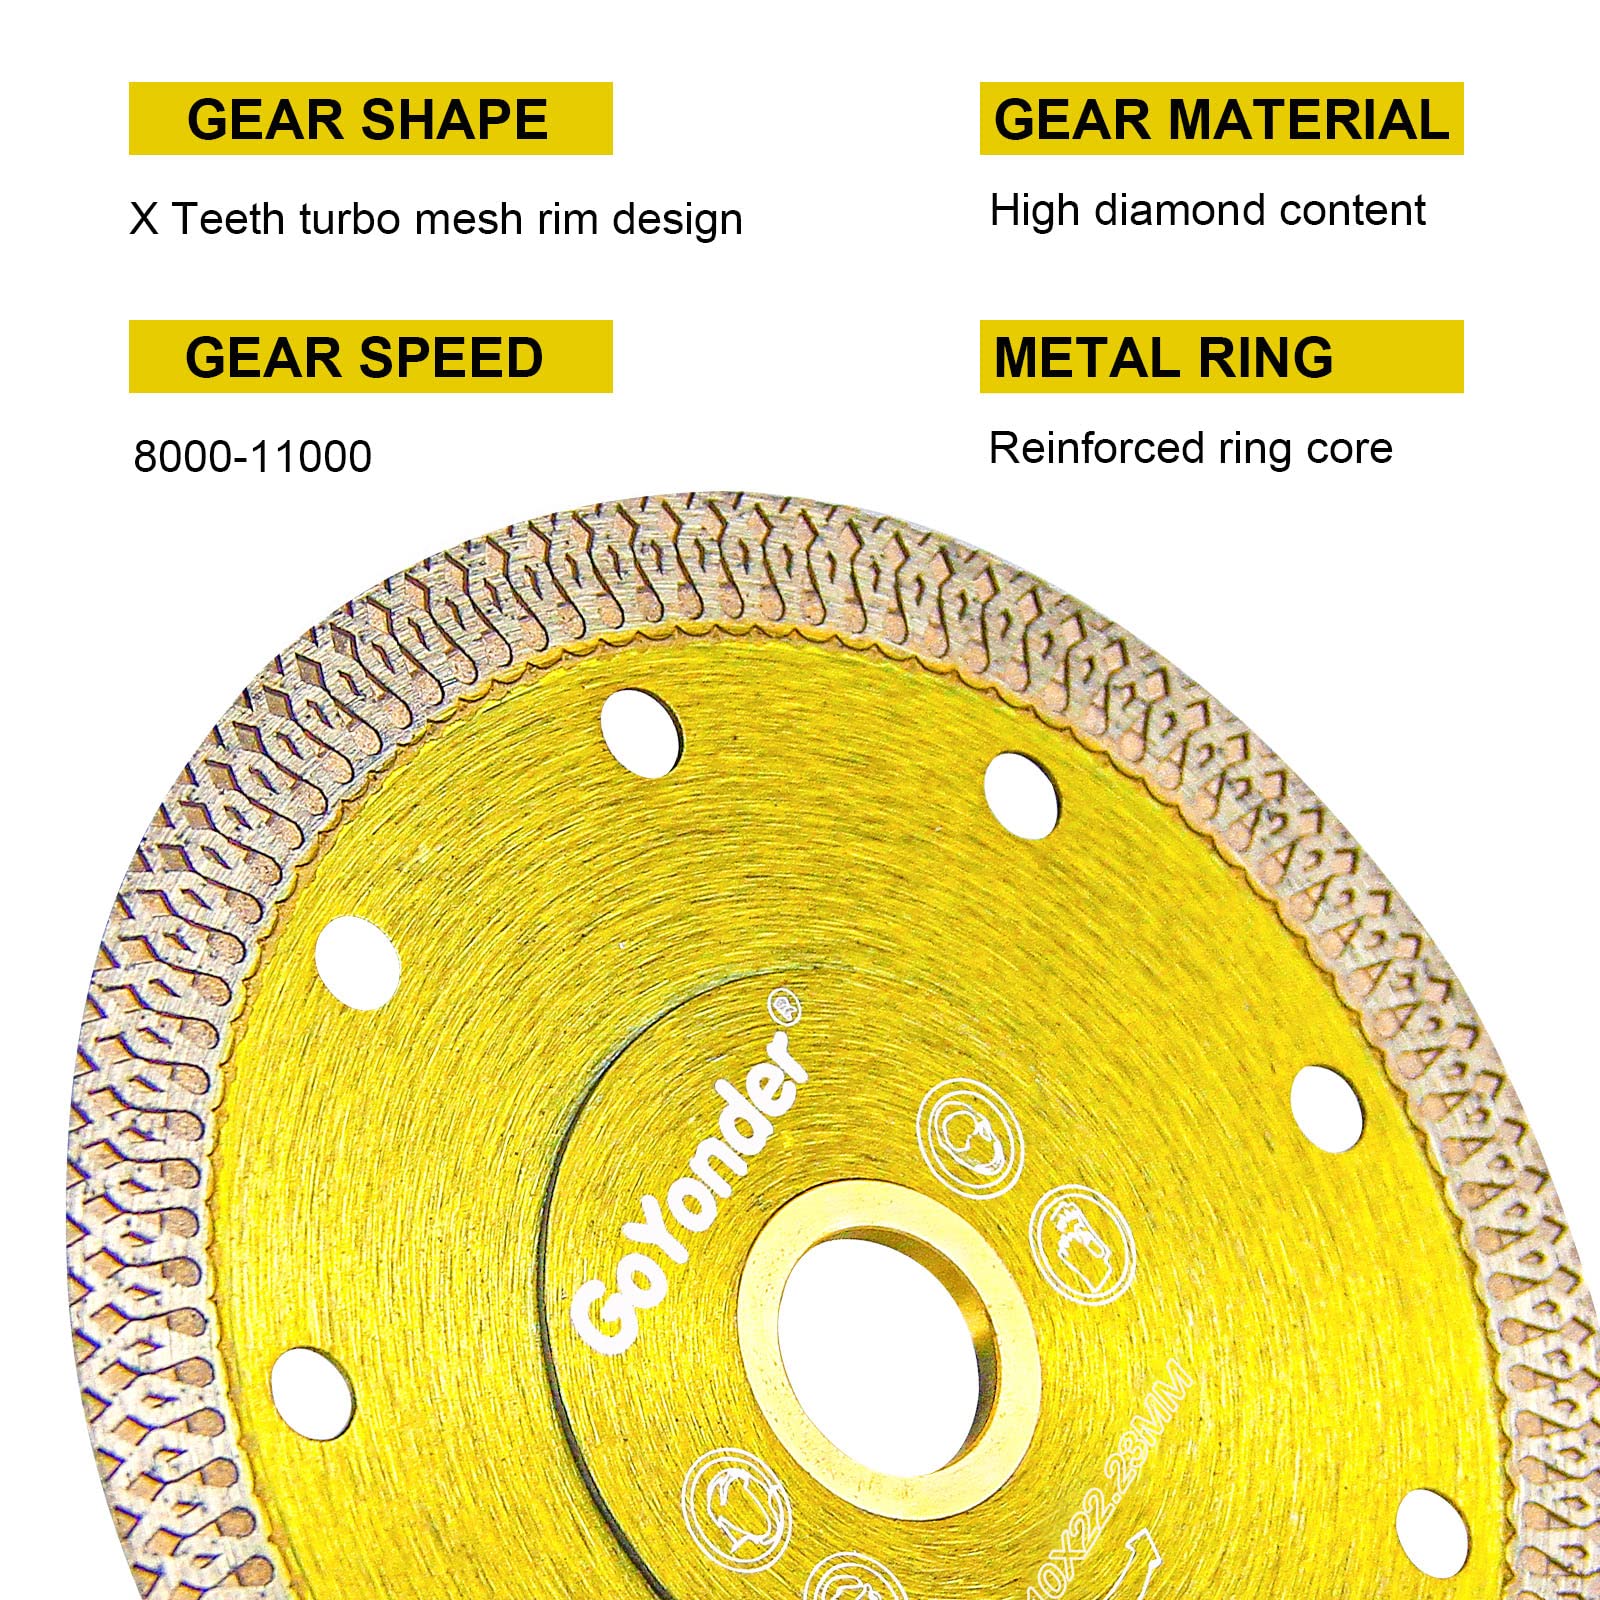 GoYonder 4 Inch Diamond Saw Blade,Super Thin Diamond Saw Blade for Cutting Ceramic Porcelain Tile Granite Marble Suitable for Angle Grinders with 7/8" or 5/8" Arbor 5 PCS